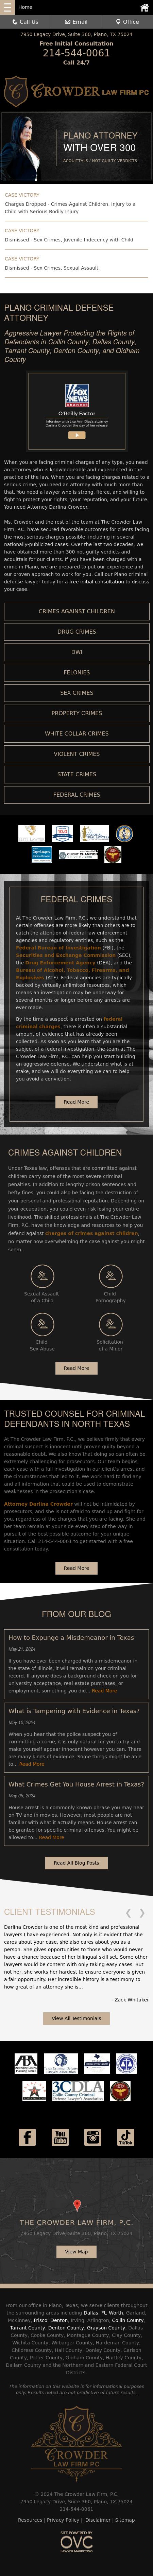 The Crowder Law Firm, P.C - Plano TX Lawyers